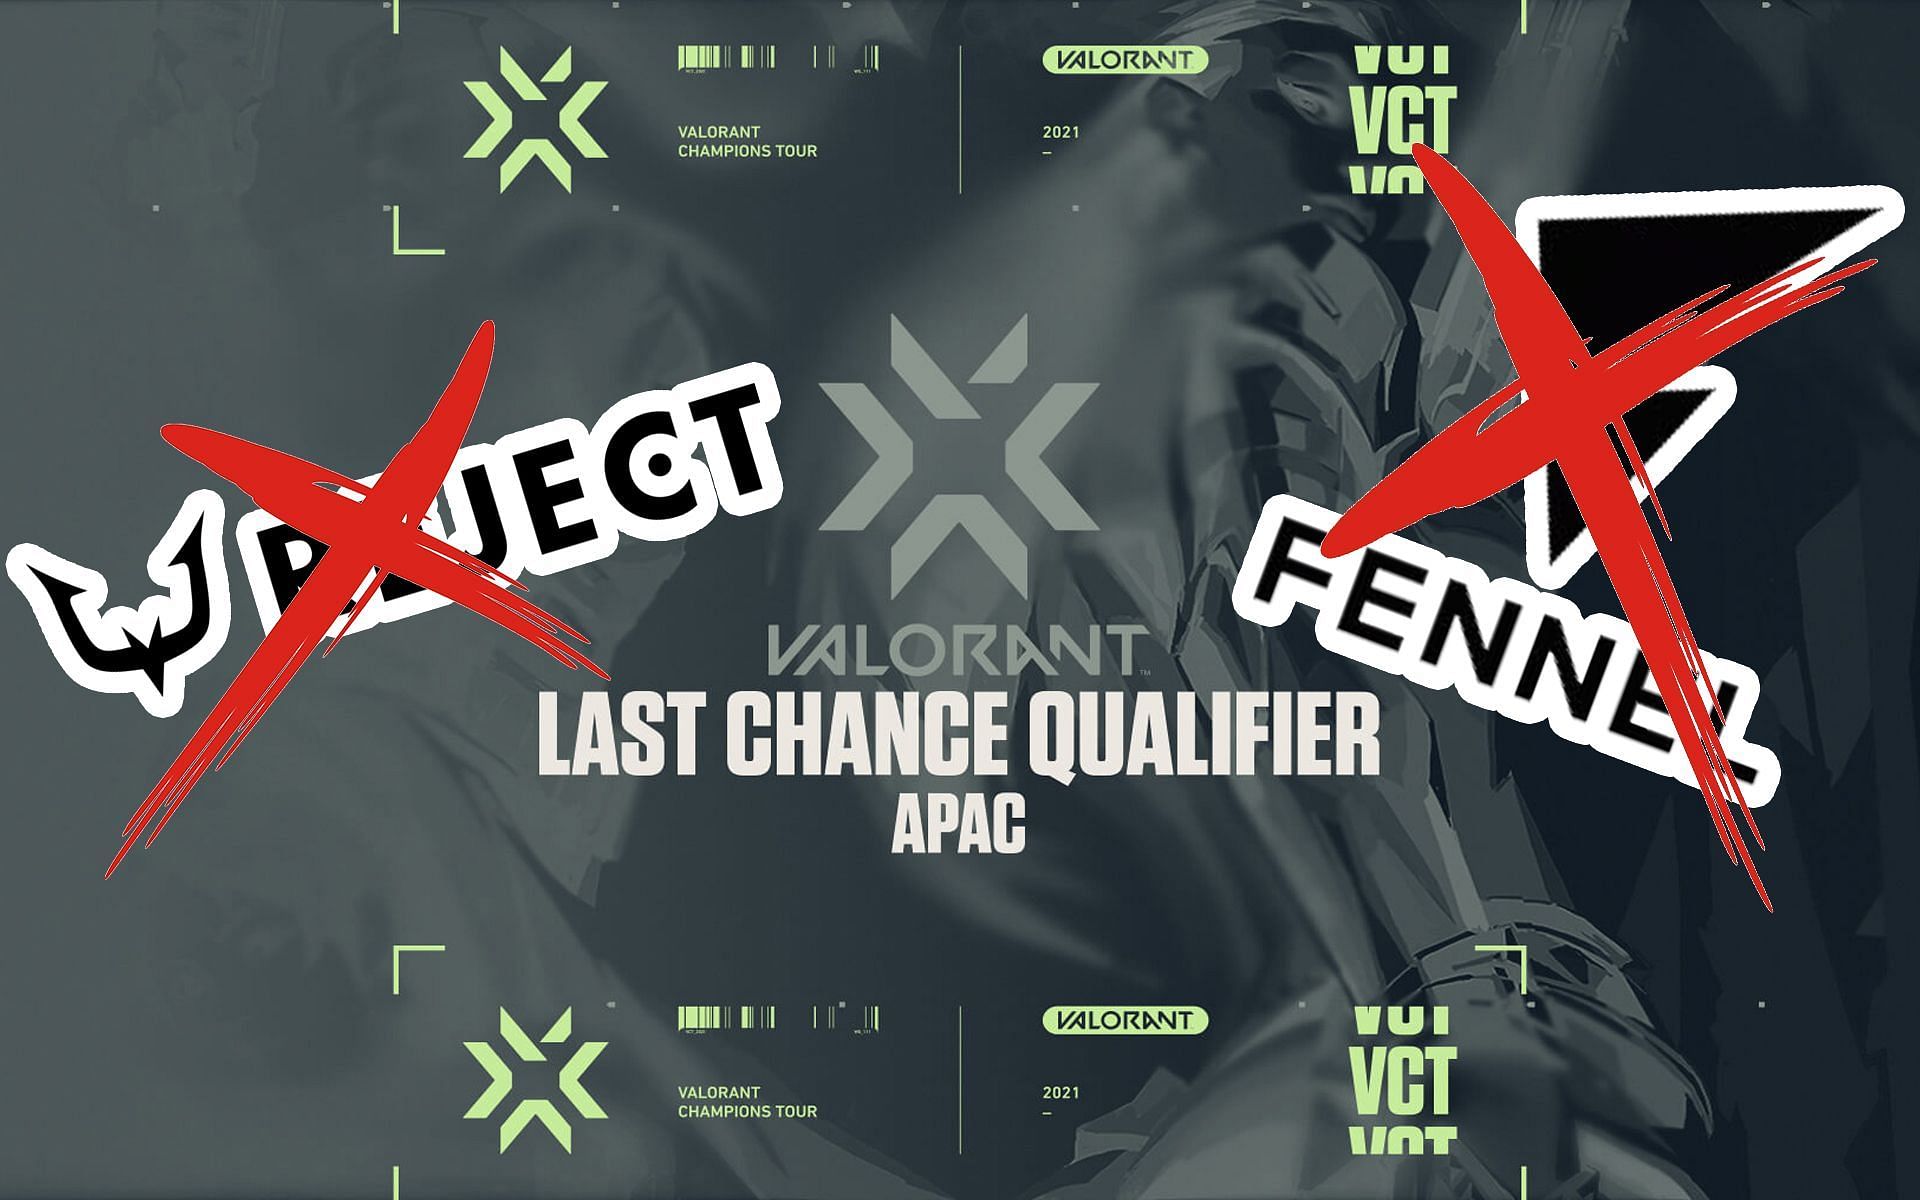 REJECT AND FENNEL gets eliminated in the Valorant Champions Tour APAC LCQ (Image by Sportskeeda)